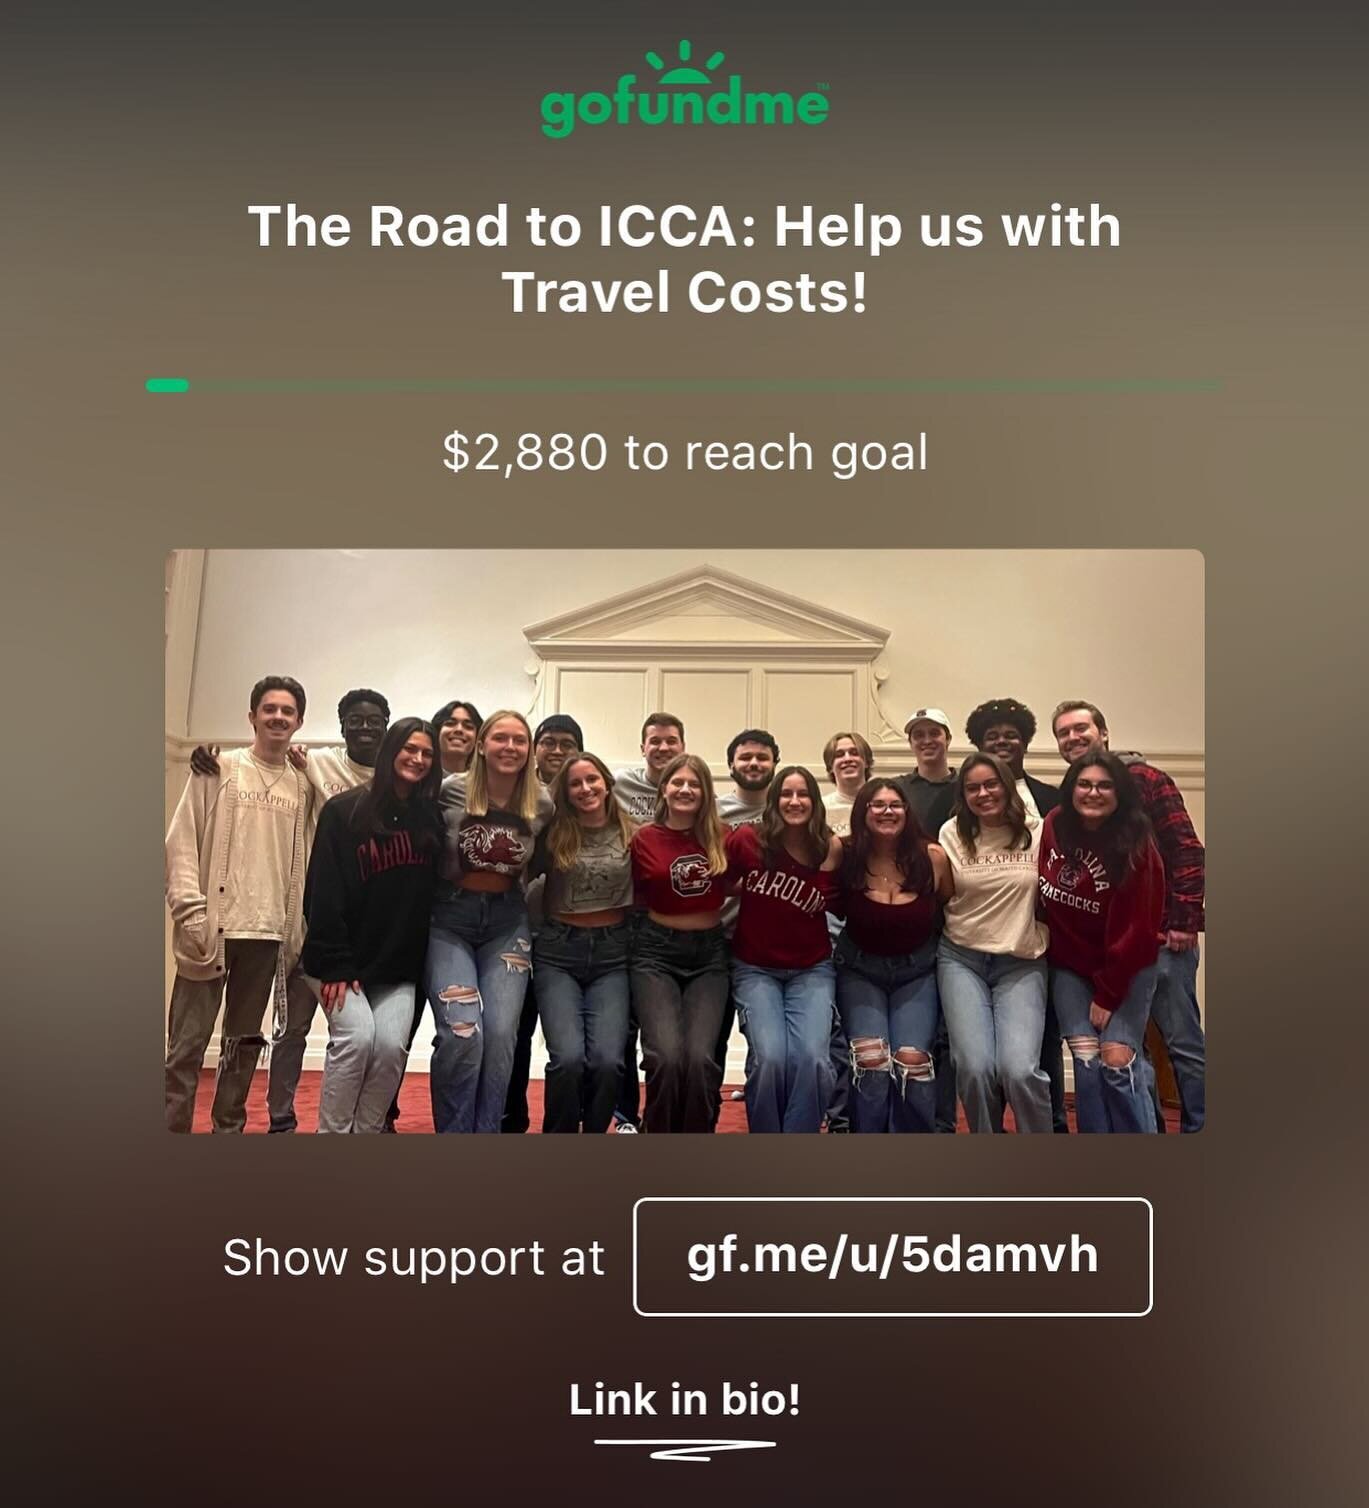 icca quarterfinals are coming up and we can&rsquo;t wait!! we thank all of you  endlessly for your support as we work to make this year&rsquo;s set our best yet! 

in addition to your support, we would also love your help raising funds for our trip t